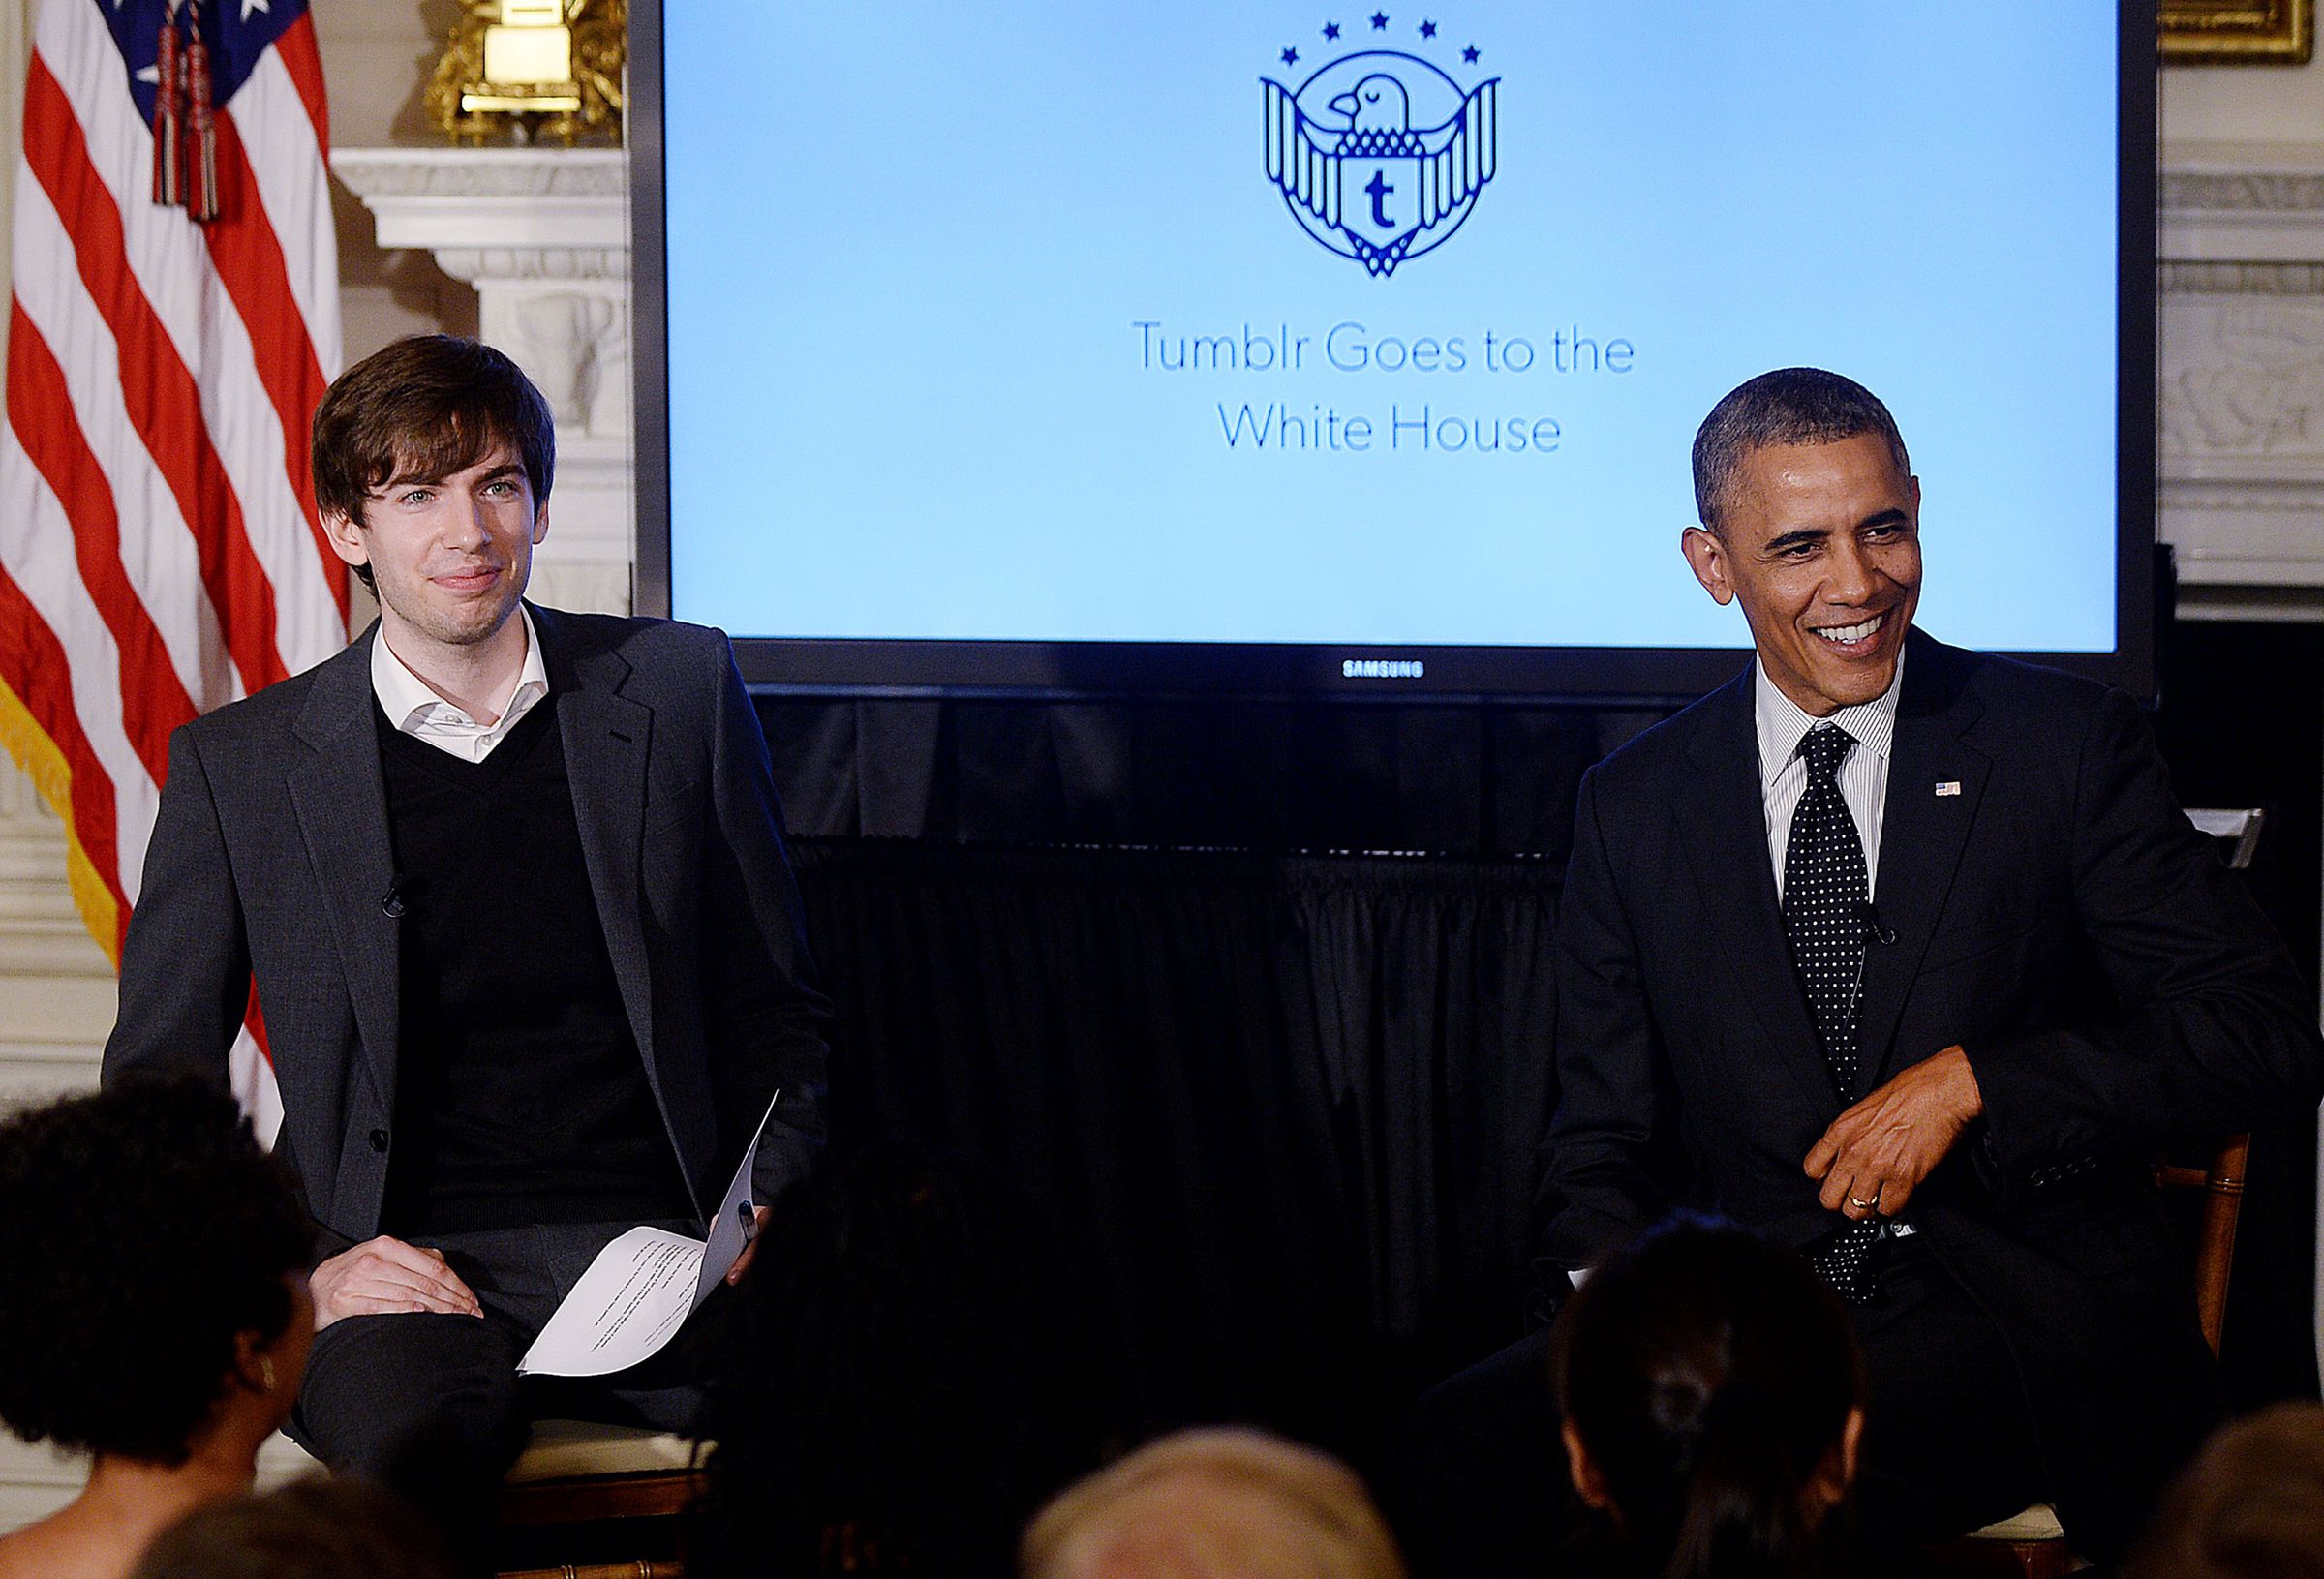 Obama Hosts Live Tumblr Q&A On Student Debt And Education